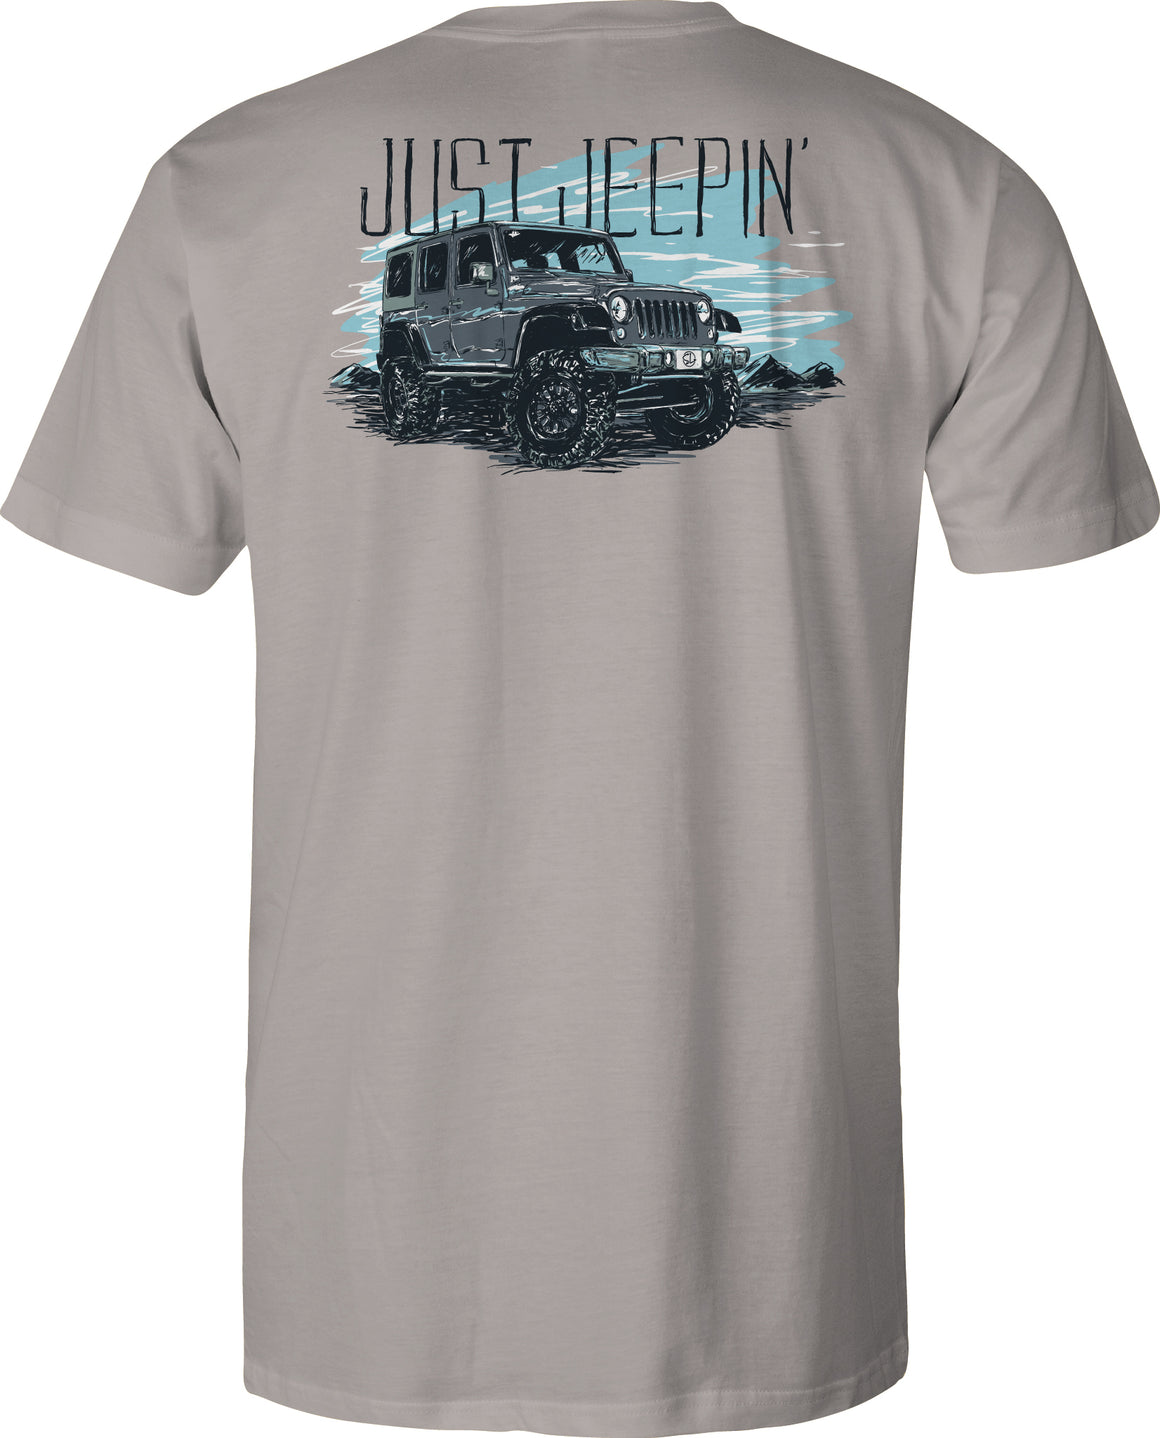 Youth Short Sleeve Tee Just Jeepin - Granite